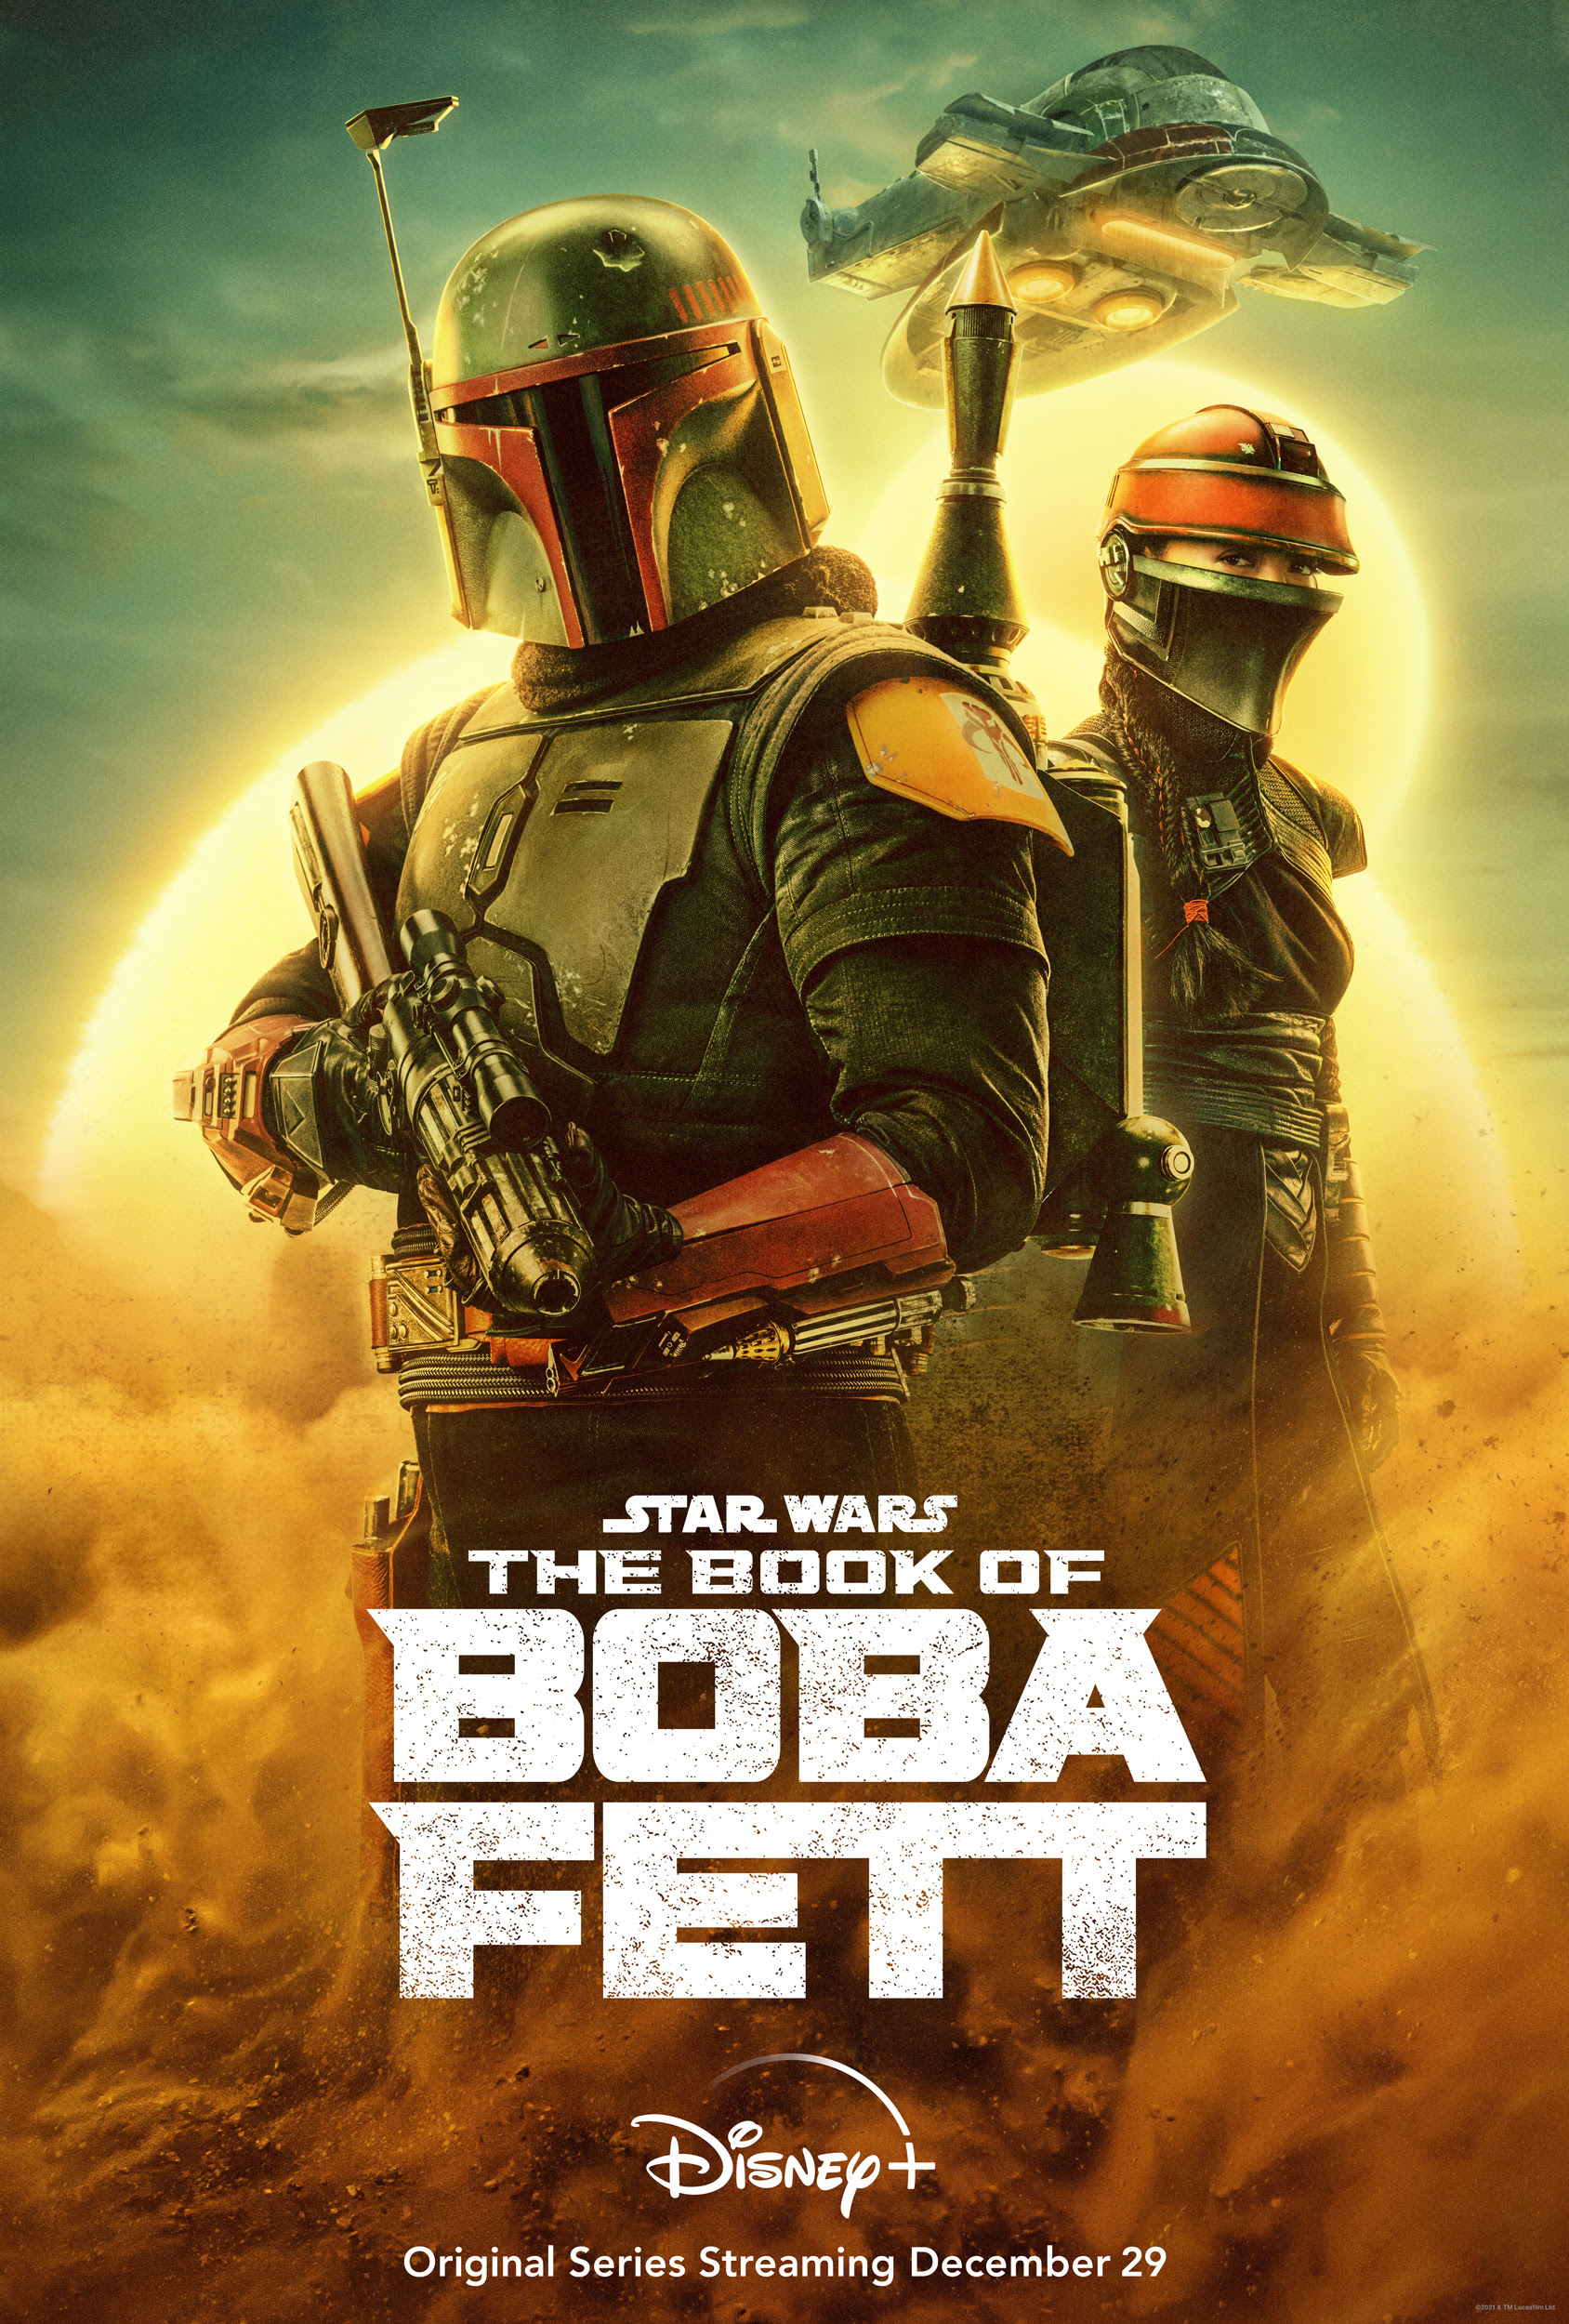 All About "The Book of Boba Fett"